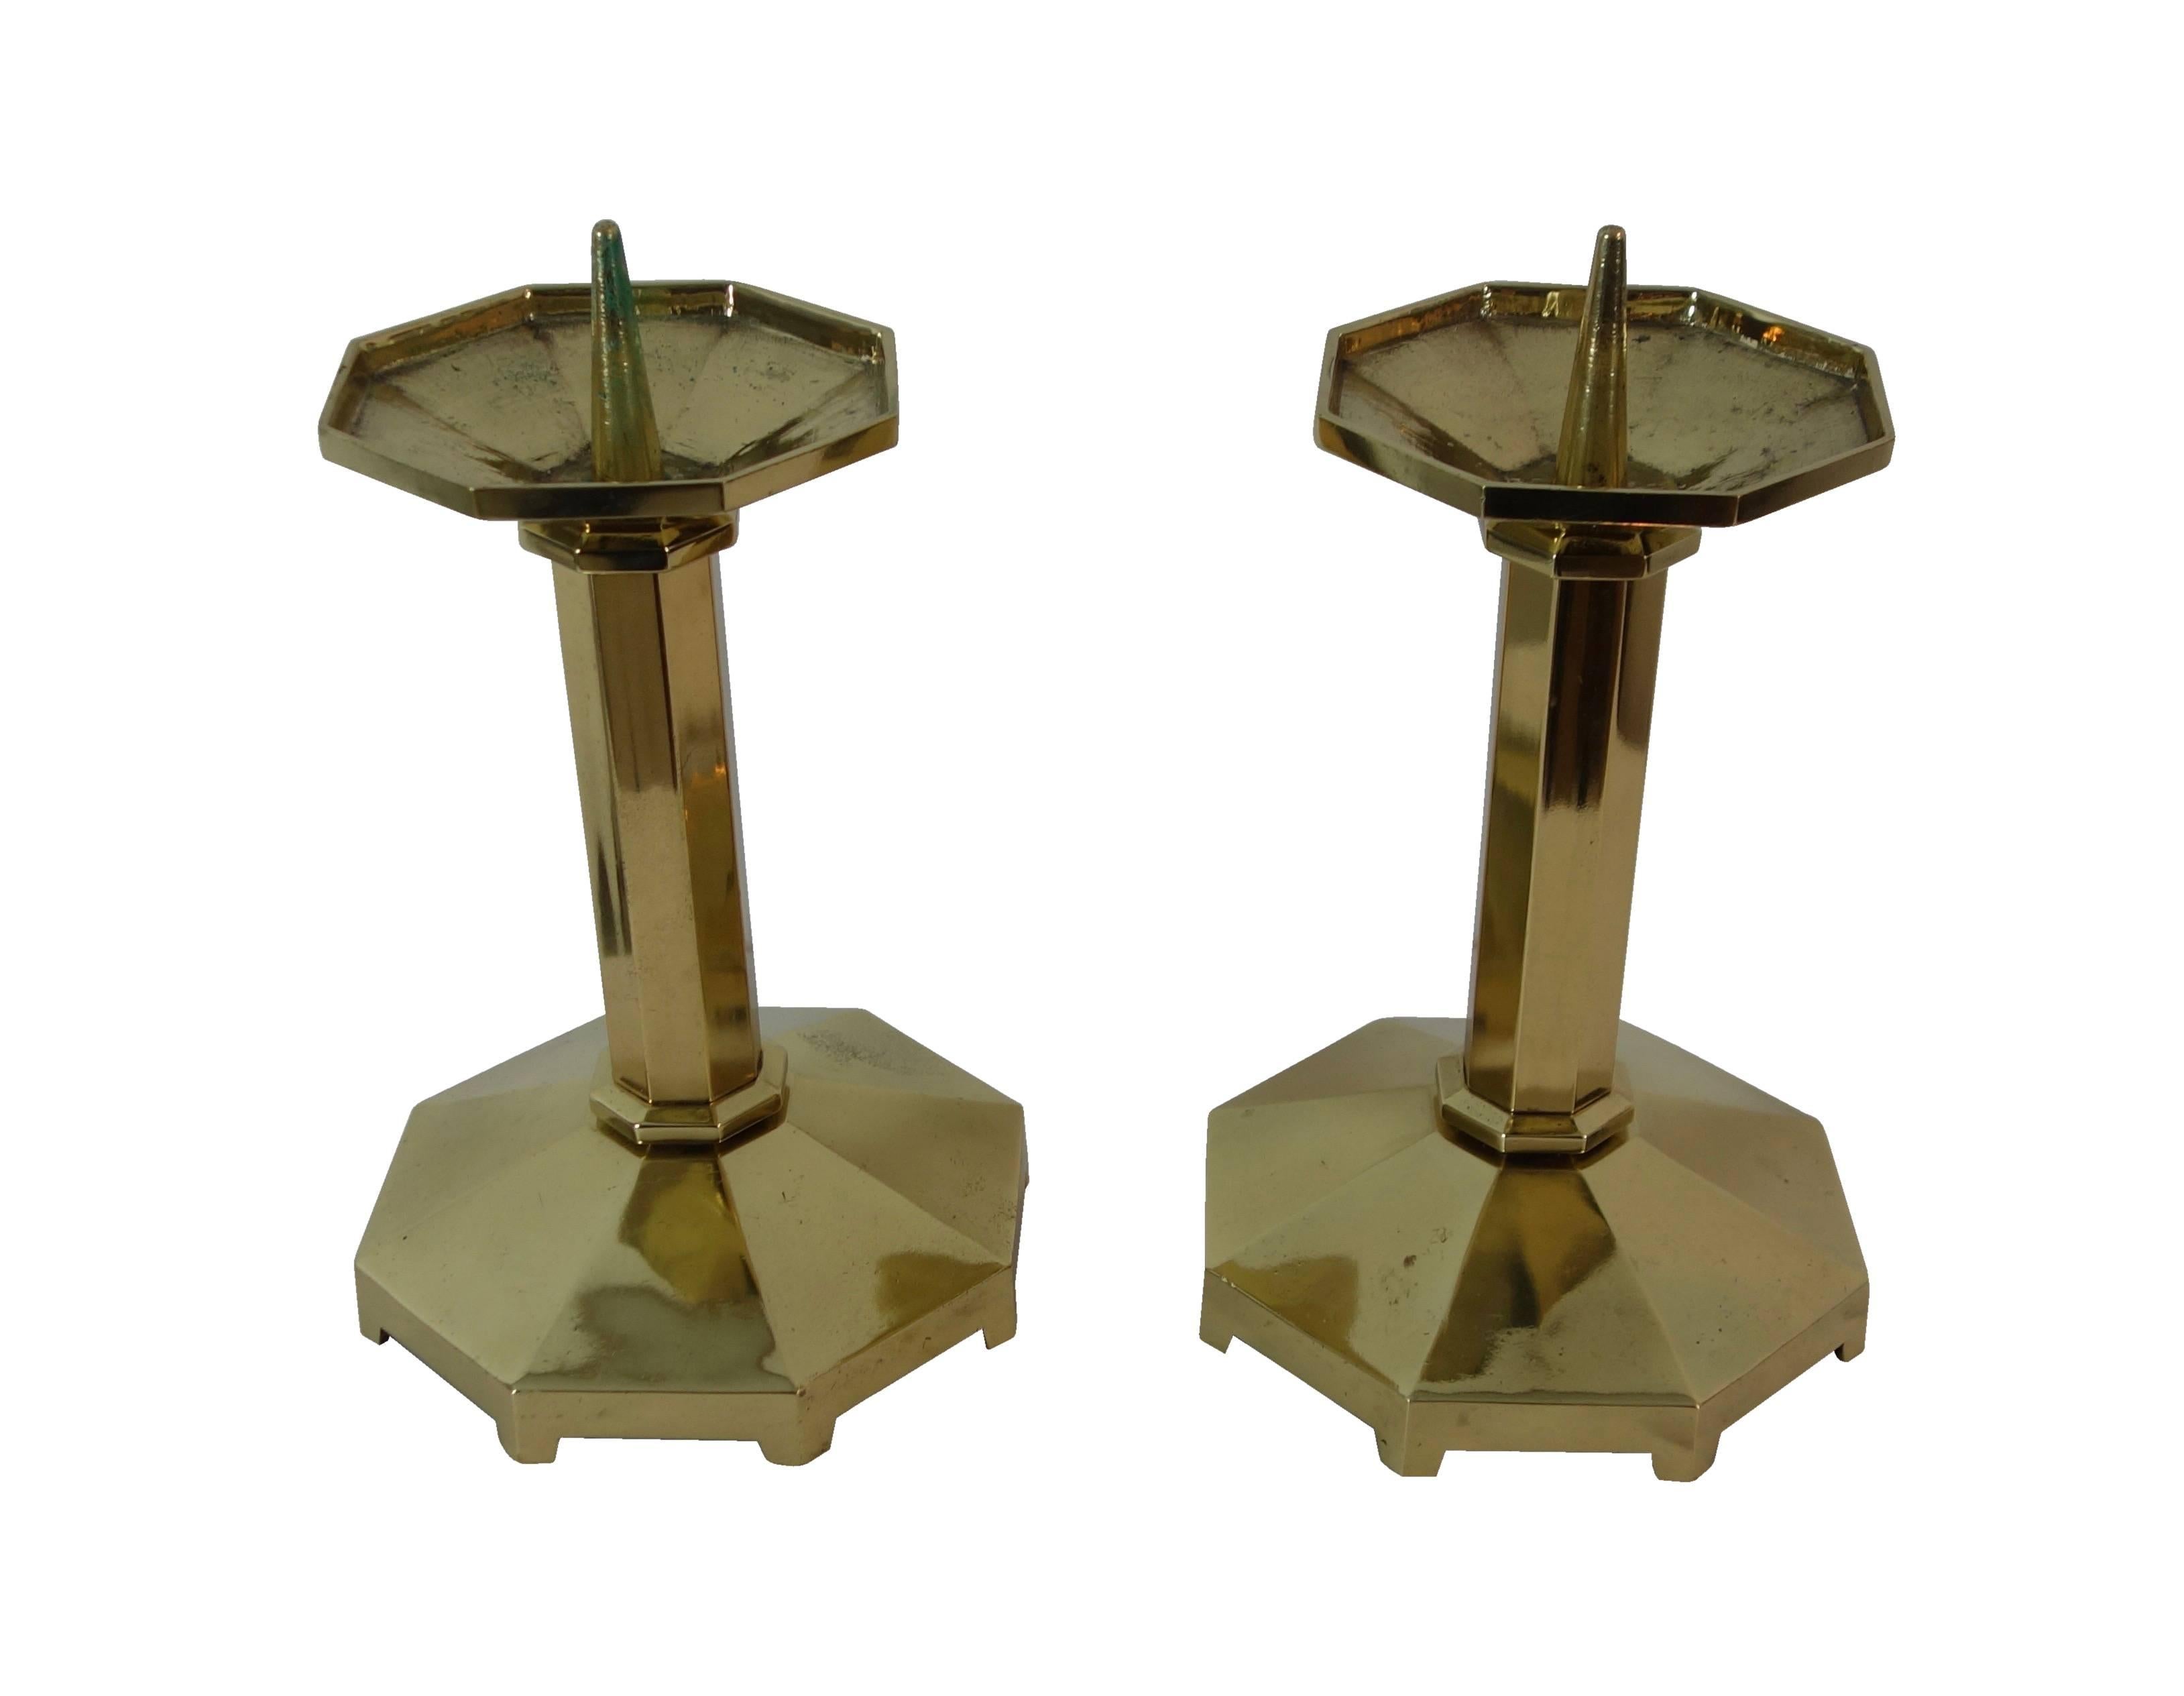 This is a pair of monumental solid brass European modernism candlesticks from Germany, circa 1930.